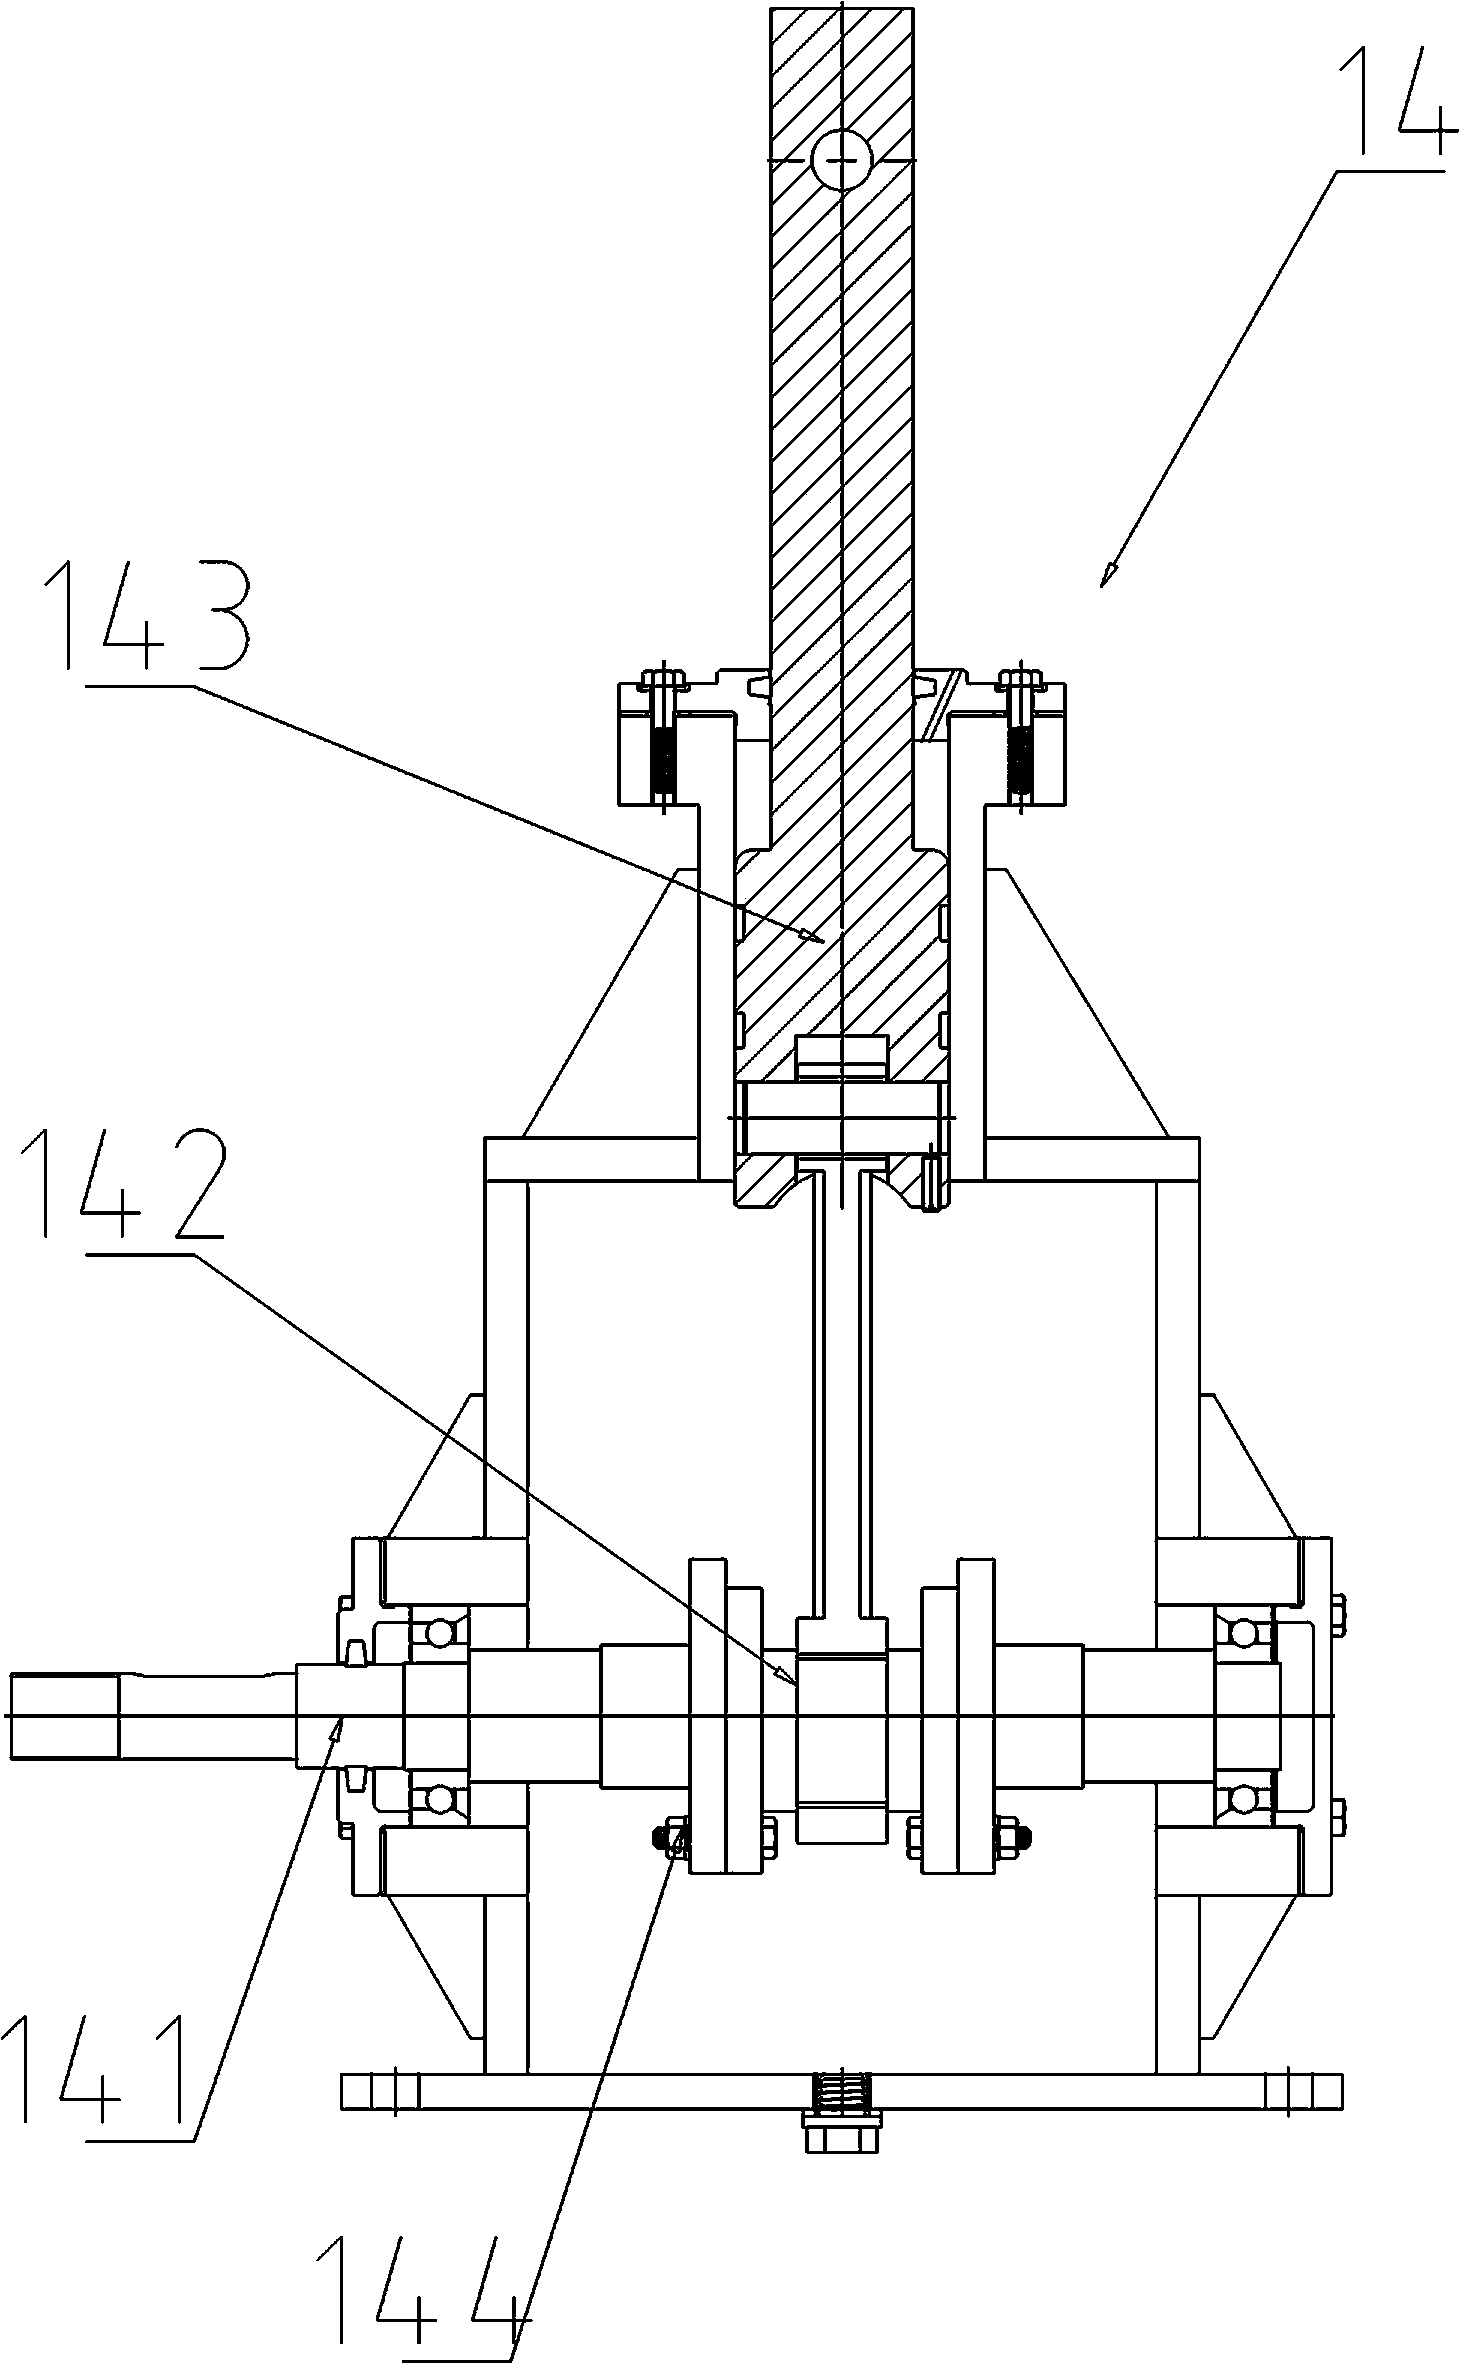 Microvibration Simulation Experimental Device for Overhead Conductors